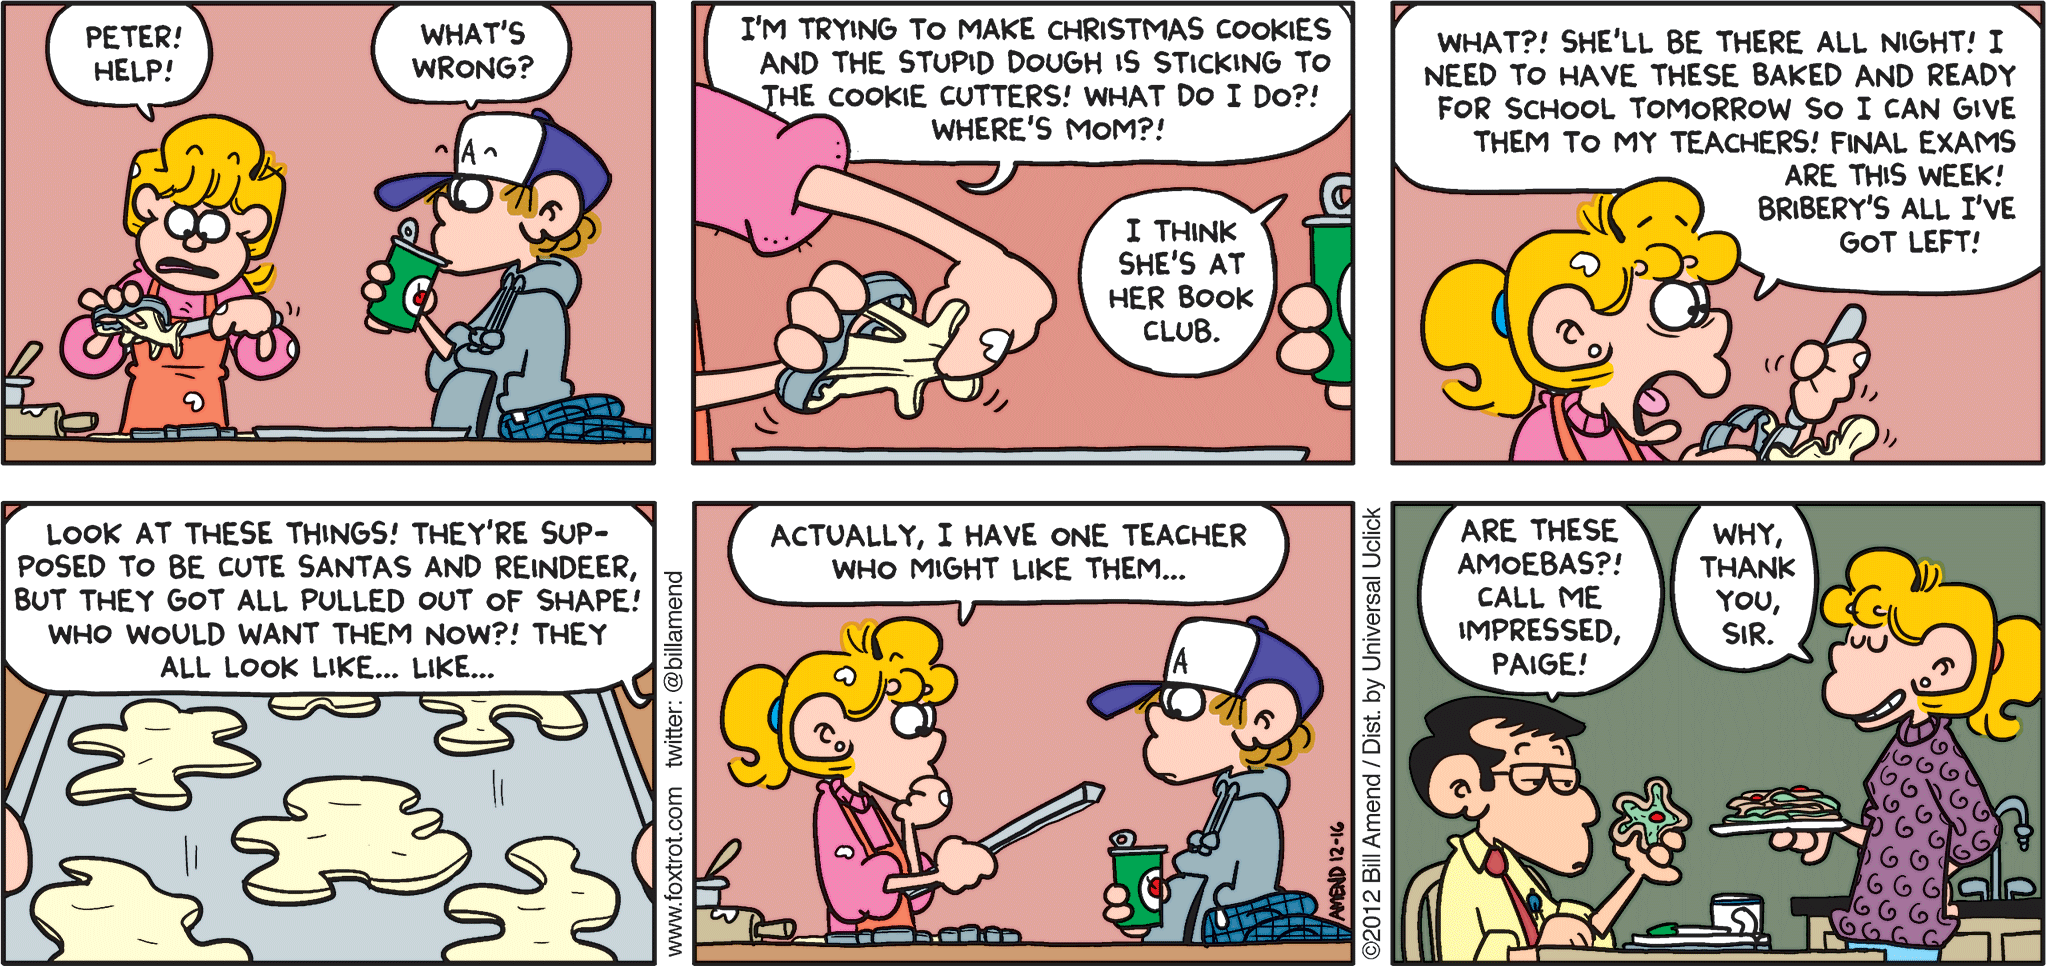 FoxTrot comic strip by Bill Amend - "Cookie Science" published December 16, 2012 - Paige: Peter! Help! Peter: What's wrong? Paige: I'm trying to make Christmas cookies and the stupid dough is sticking to the cookie cutters! What do I do?! Where's Mom?! Peter: I think she's at her book club. Paige: What?! She'll be there all night! I need to have these baked and ready for school tomorrow so I can give them to my teachers! Final exams are this week! Bribery's all I've got left! Look at these things! They're supposed to be cute Santas and reindeer, but they got all pulled out of shape! Who would want them now?! They all look like...like...Actually, I have one teacher who might like them... Man: Are these amoebas?! Call me impressed, Paige! Paige: Why, thank you,